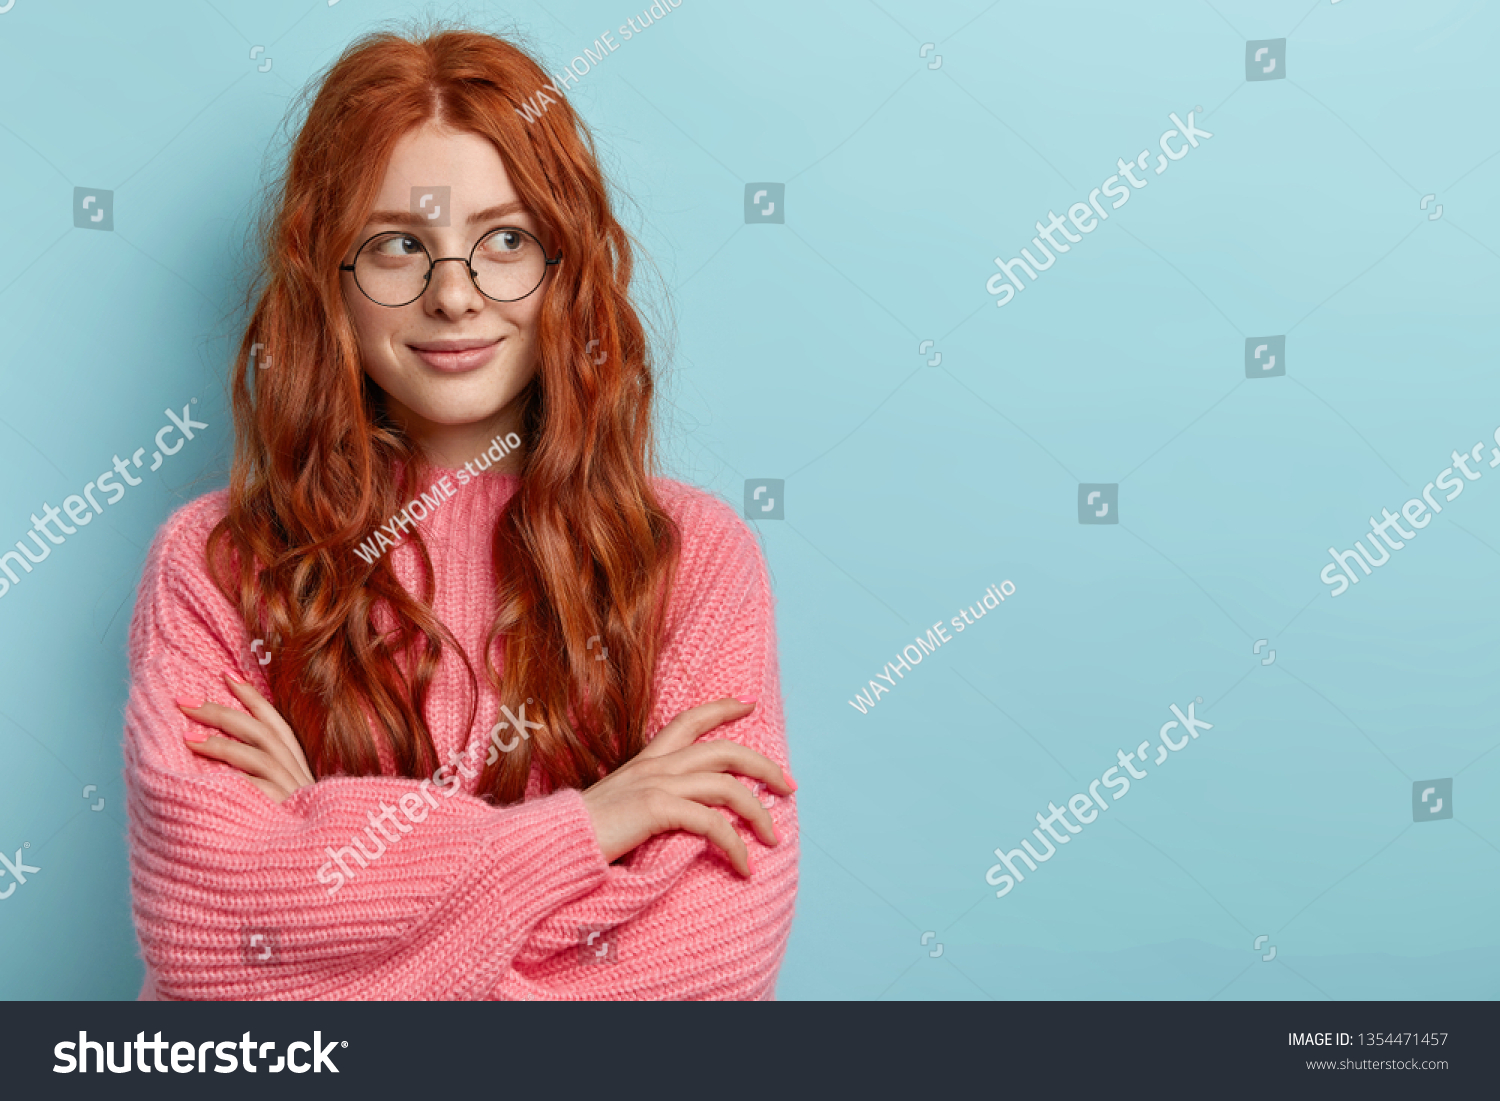 Pensive dreamy lovely young ginger female with pleasant appearance, imagines dreams come true, keeps hands crossed, dressed in oversized jumper, wears optical glasses, isolated over blue wall. #1354471457